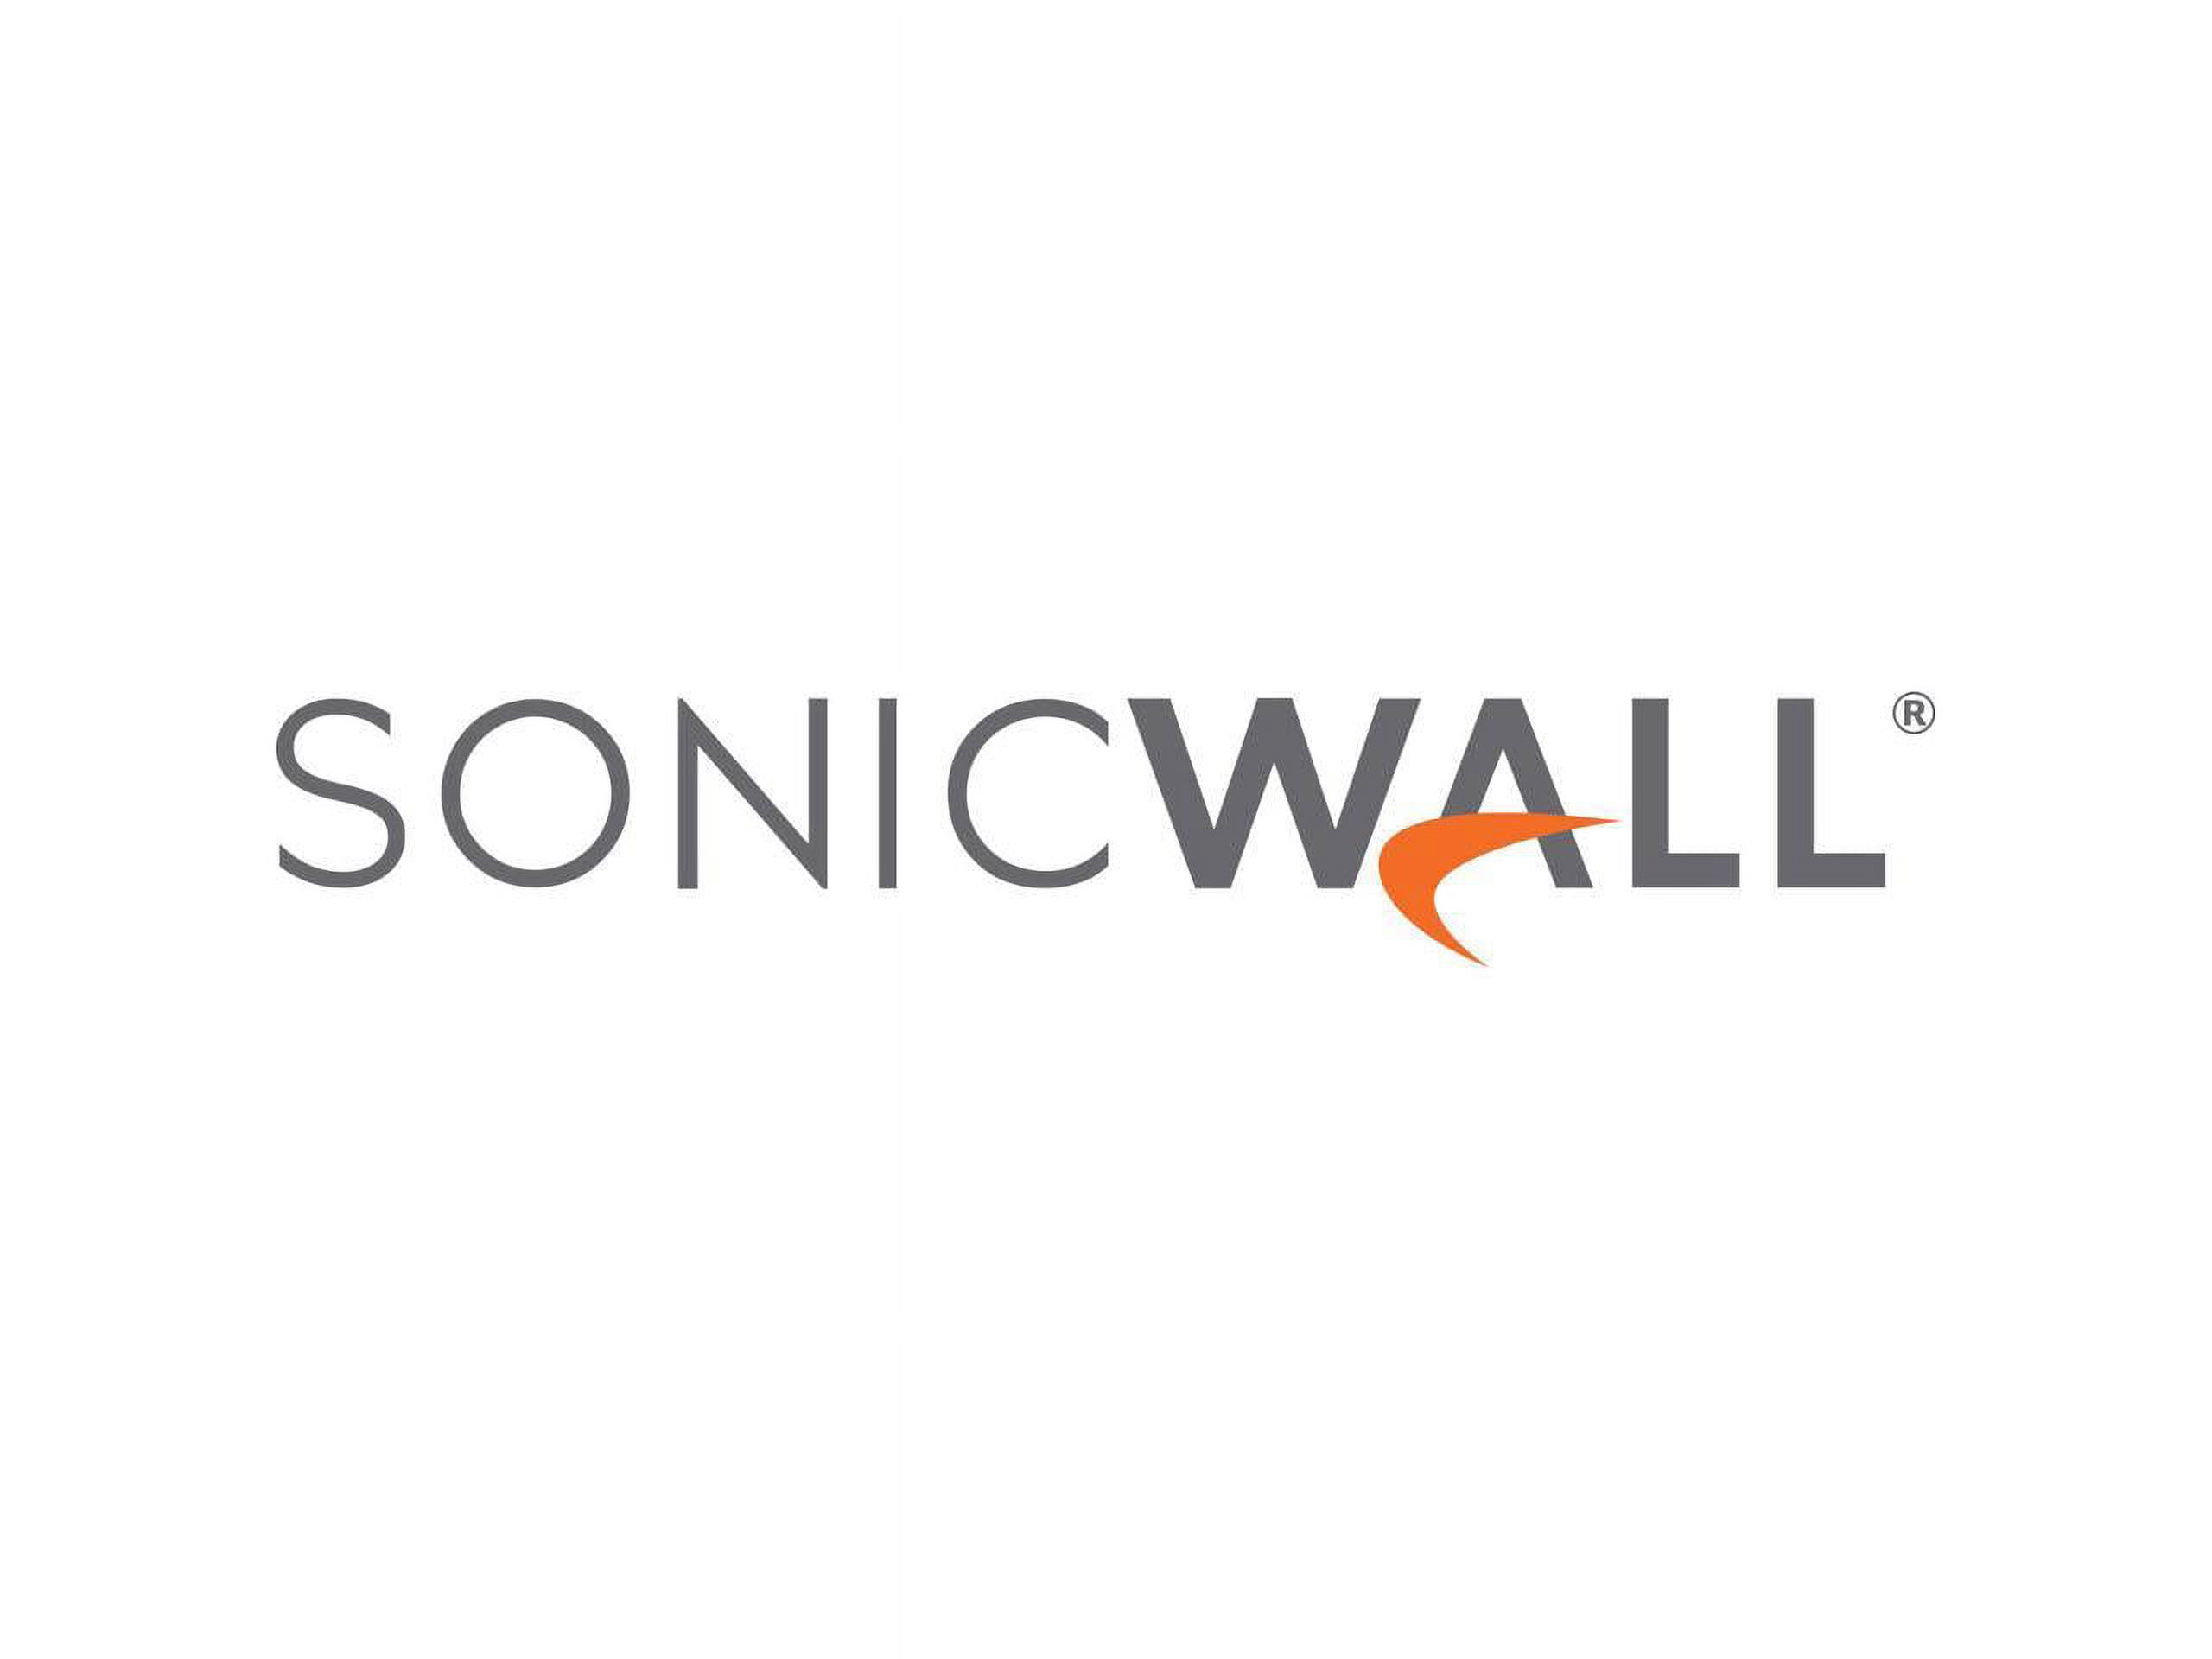 SonicWall NSA 4650/5650/6650/9250/9450/9650 FRU Power Supply 01-SSC-0019 - image 4 of 11